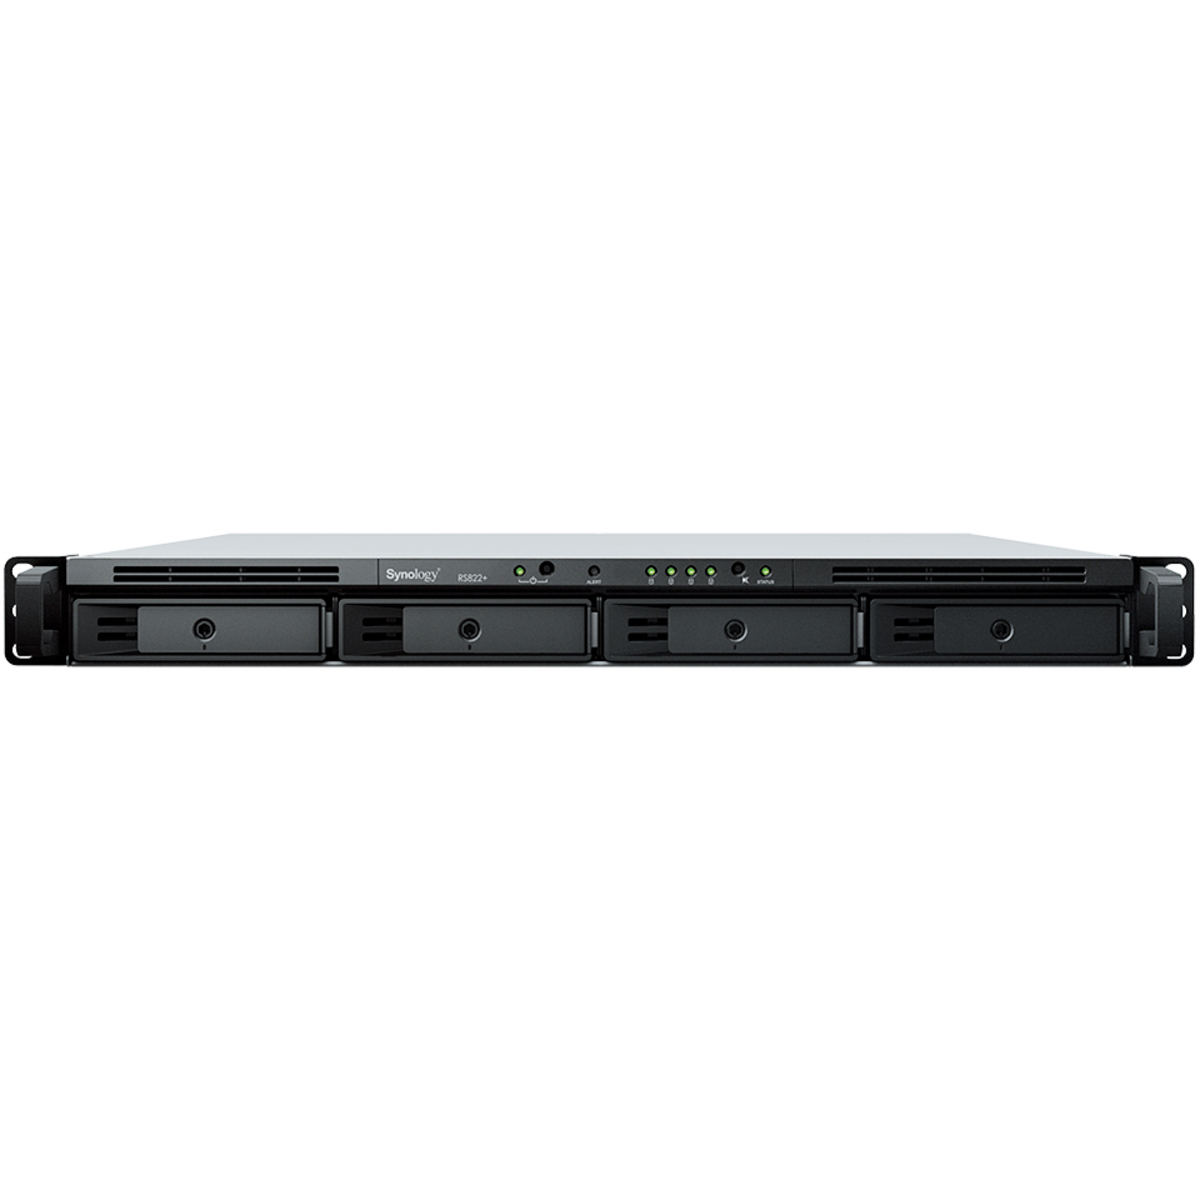 Synology RackStation RS822+ 80tb 4-Bay RackMount Multimedia / Power User / Business NAS - Network Attached Storage Device 4x20tb Western Digital Red Pro WD201KFGX 3.5 7200rpm SATA 6Gb/s HDD NAS Class Drives Installed - Burn-In Tested RackStation RS822+